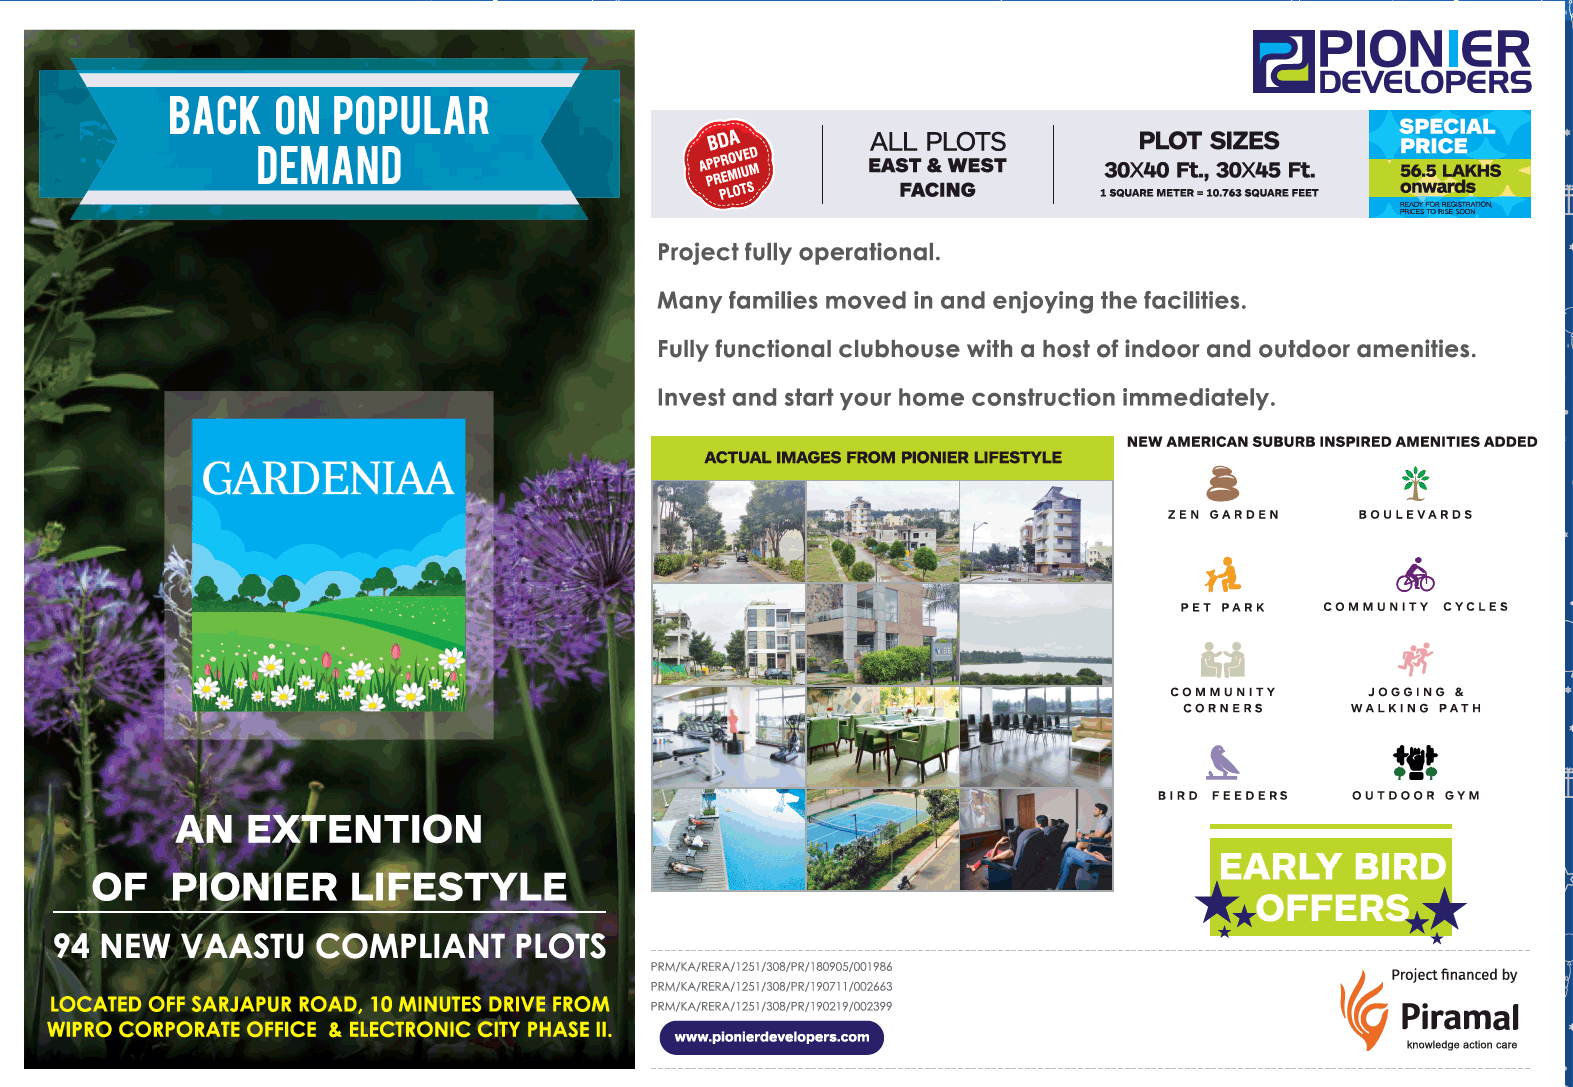 Special price Rs 56.5 Lac onwards at Pioneer Gardenia, Bangalore Update